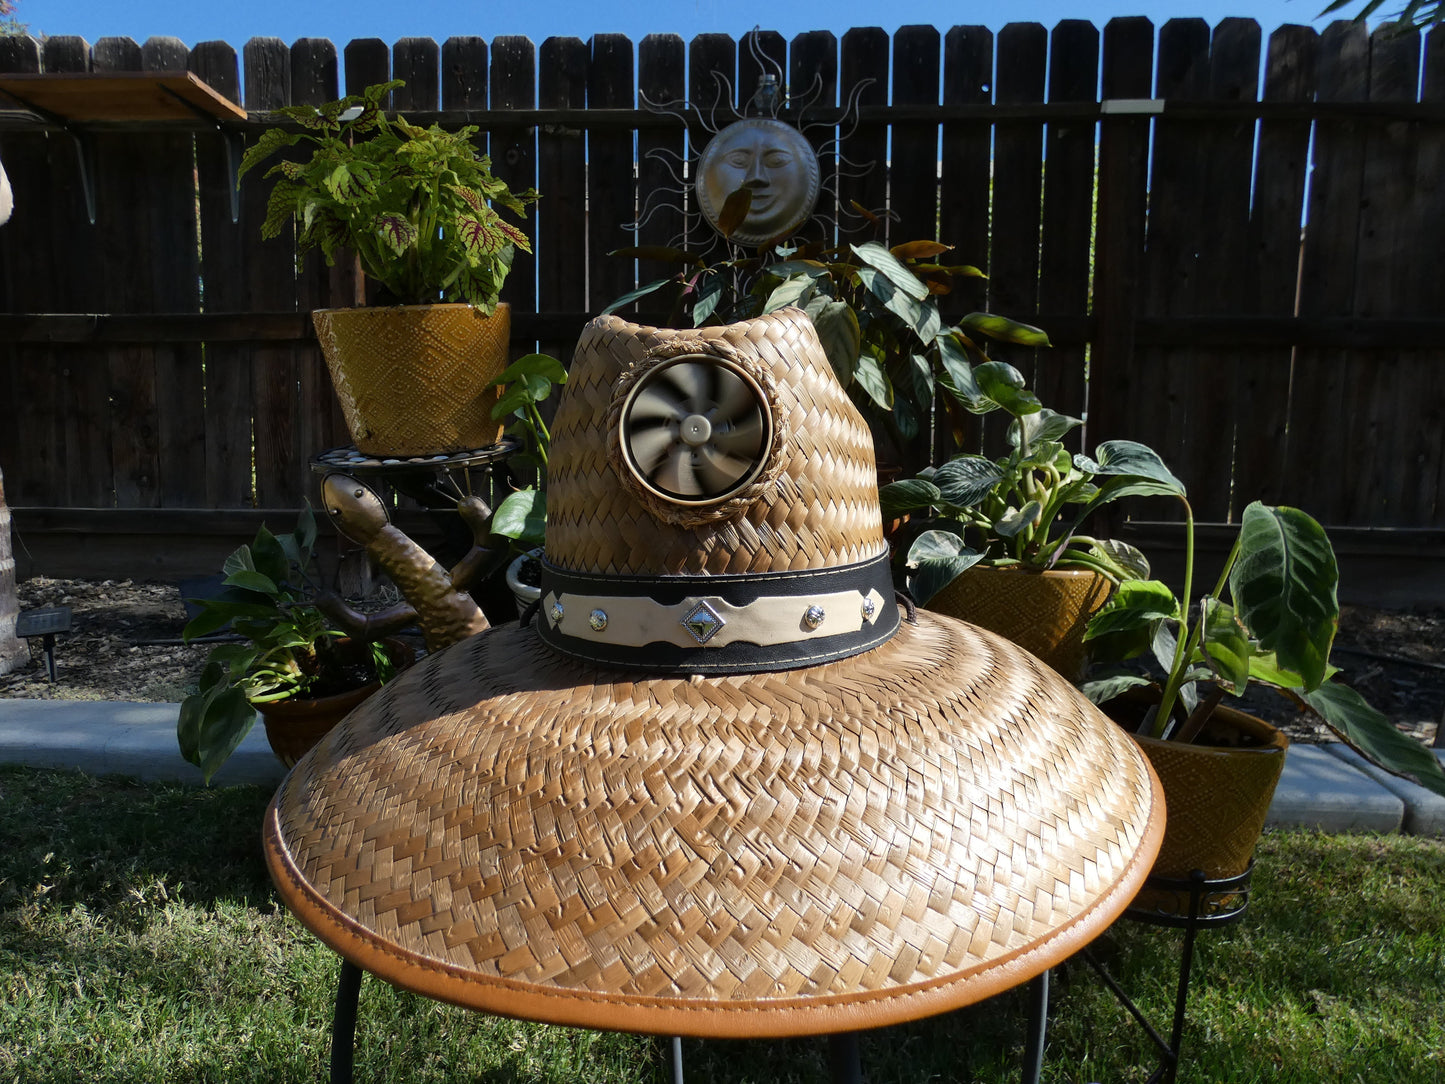 Men's Thurman with Band Solar Hat - Sun Hat with Fan, Extra Large